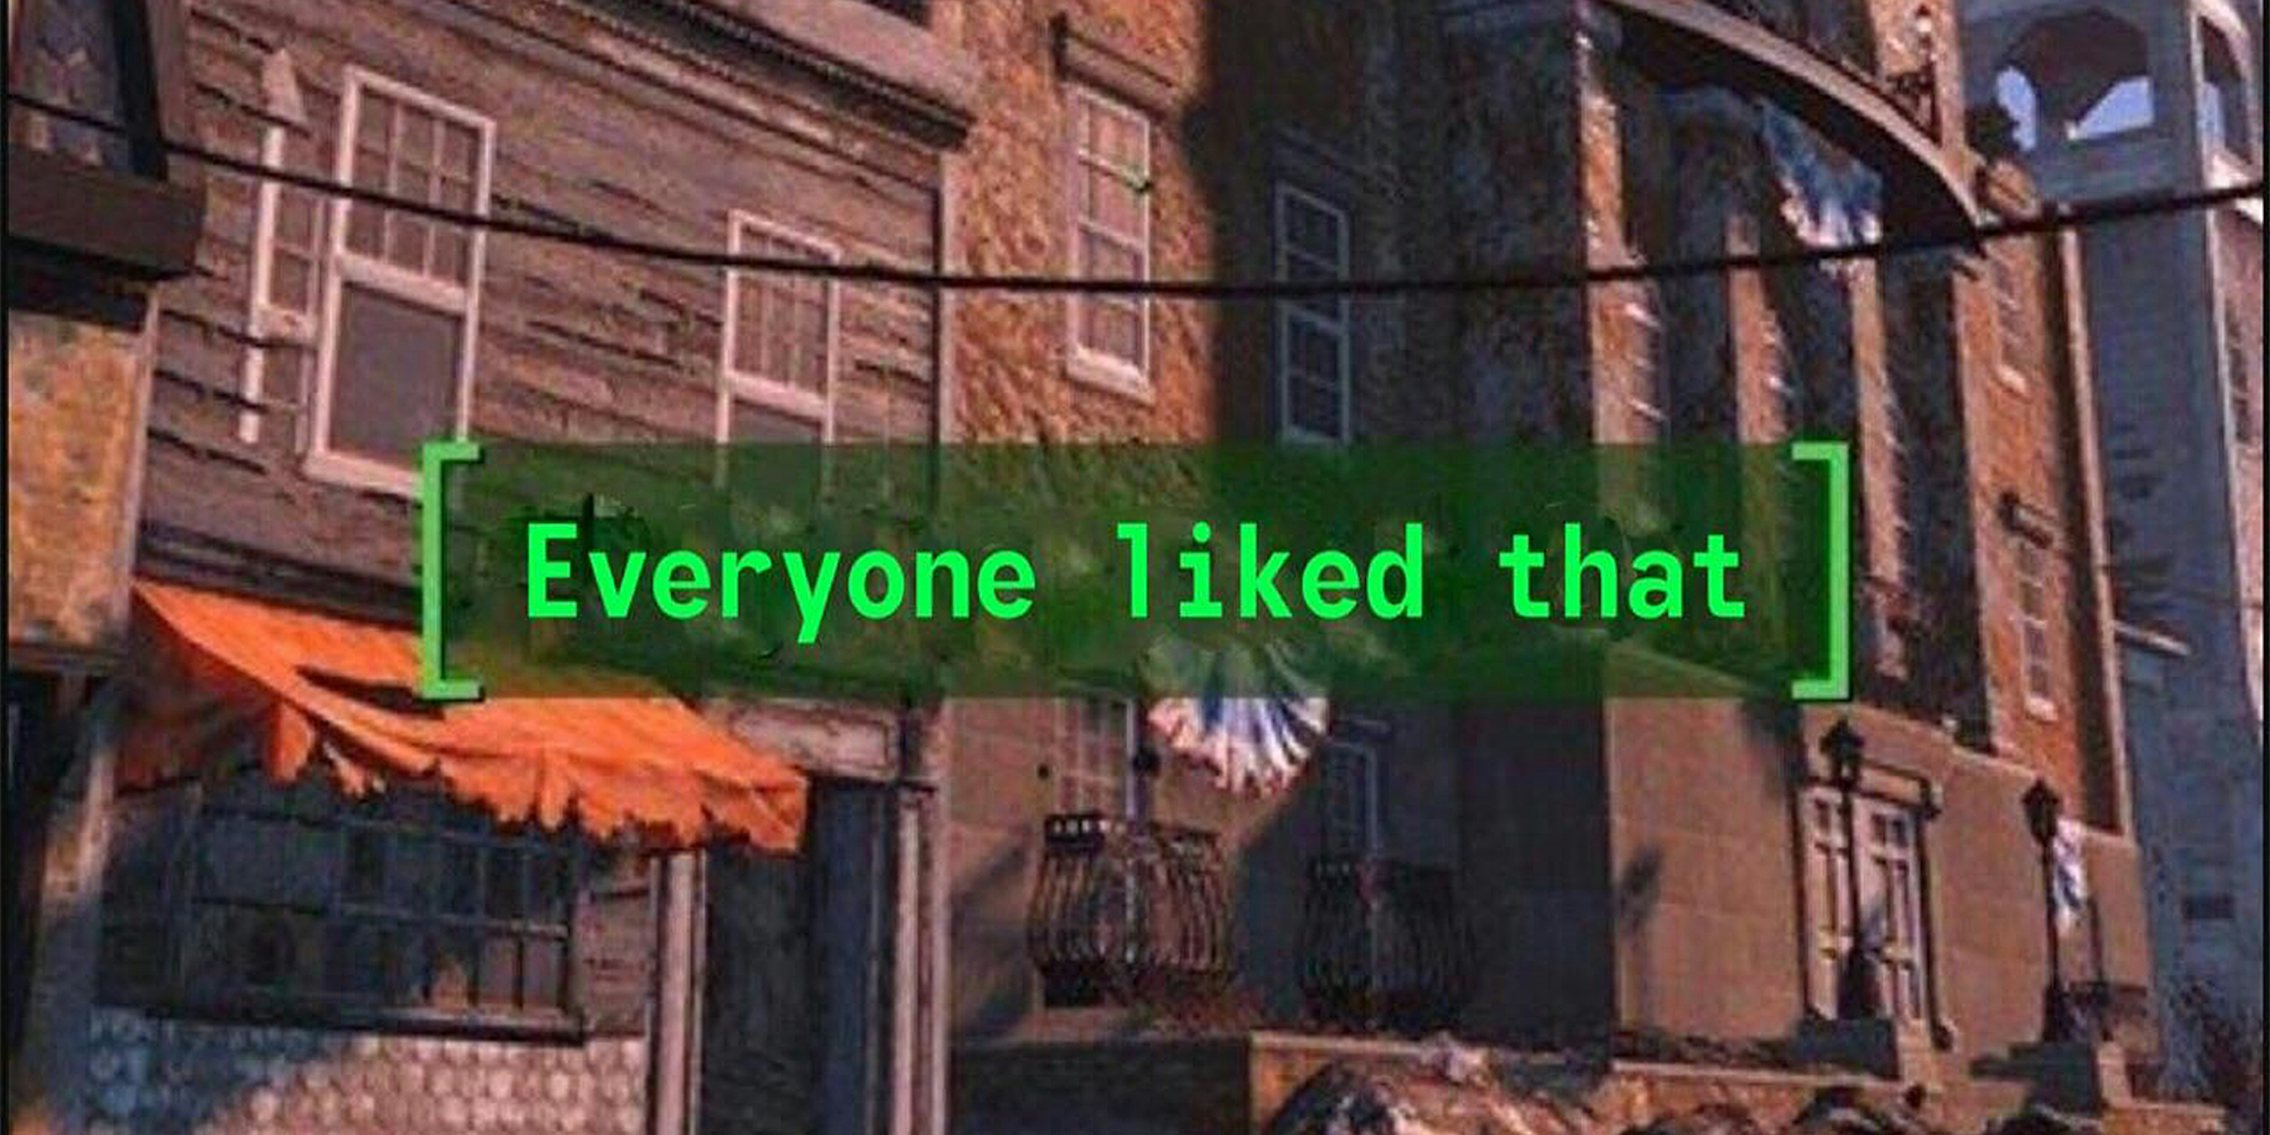 Fallout: Everyone liked that meme